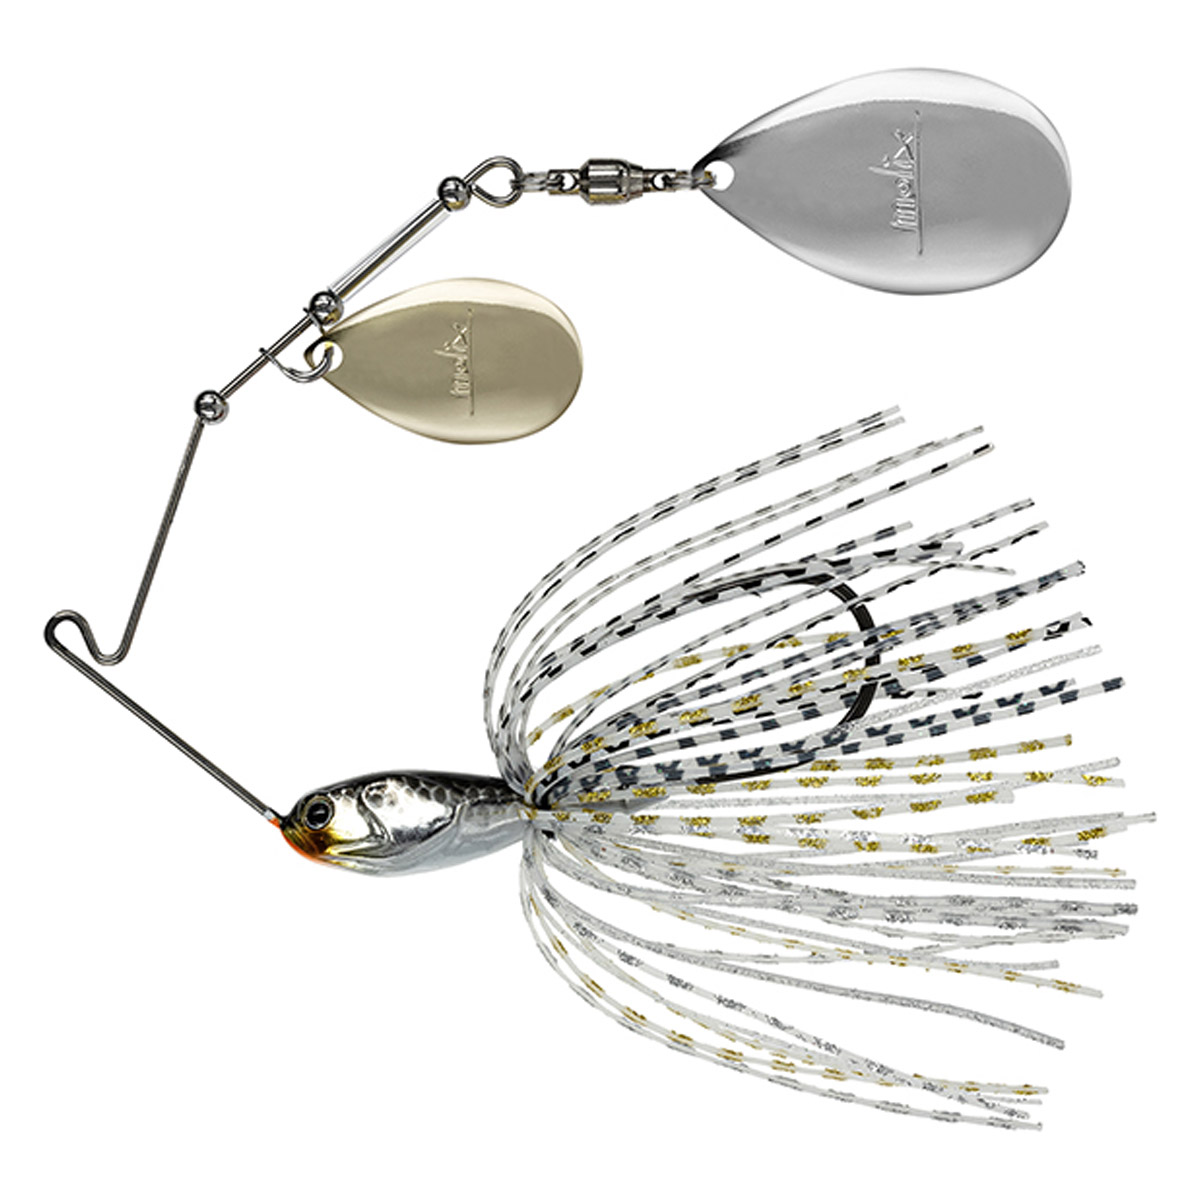 Molix Muscle Ant DI Spinnerbait 10,5 Gram